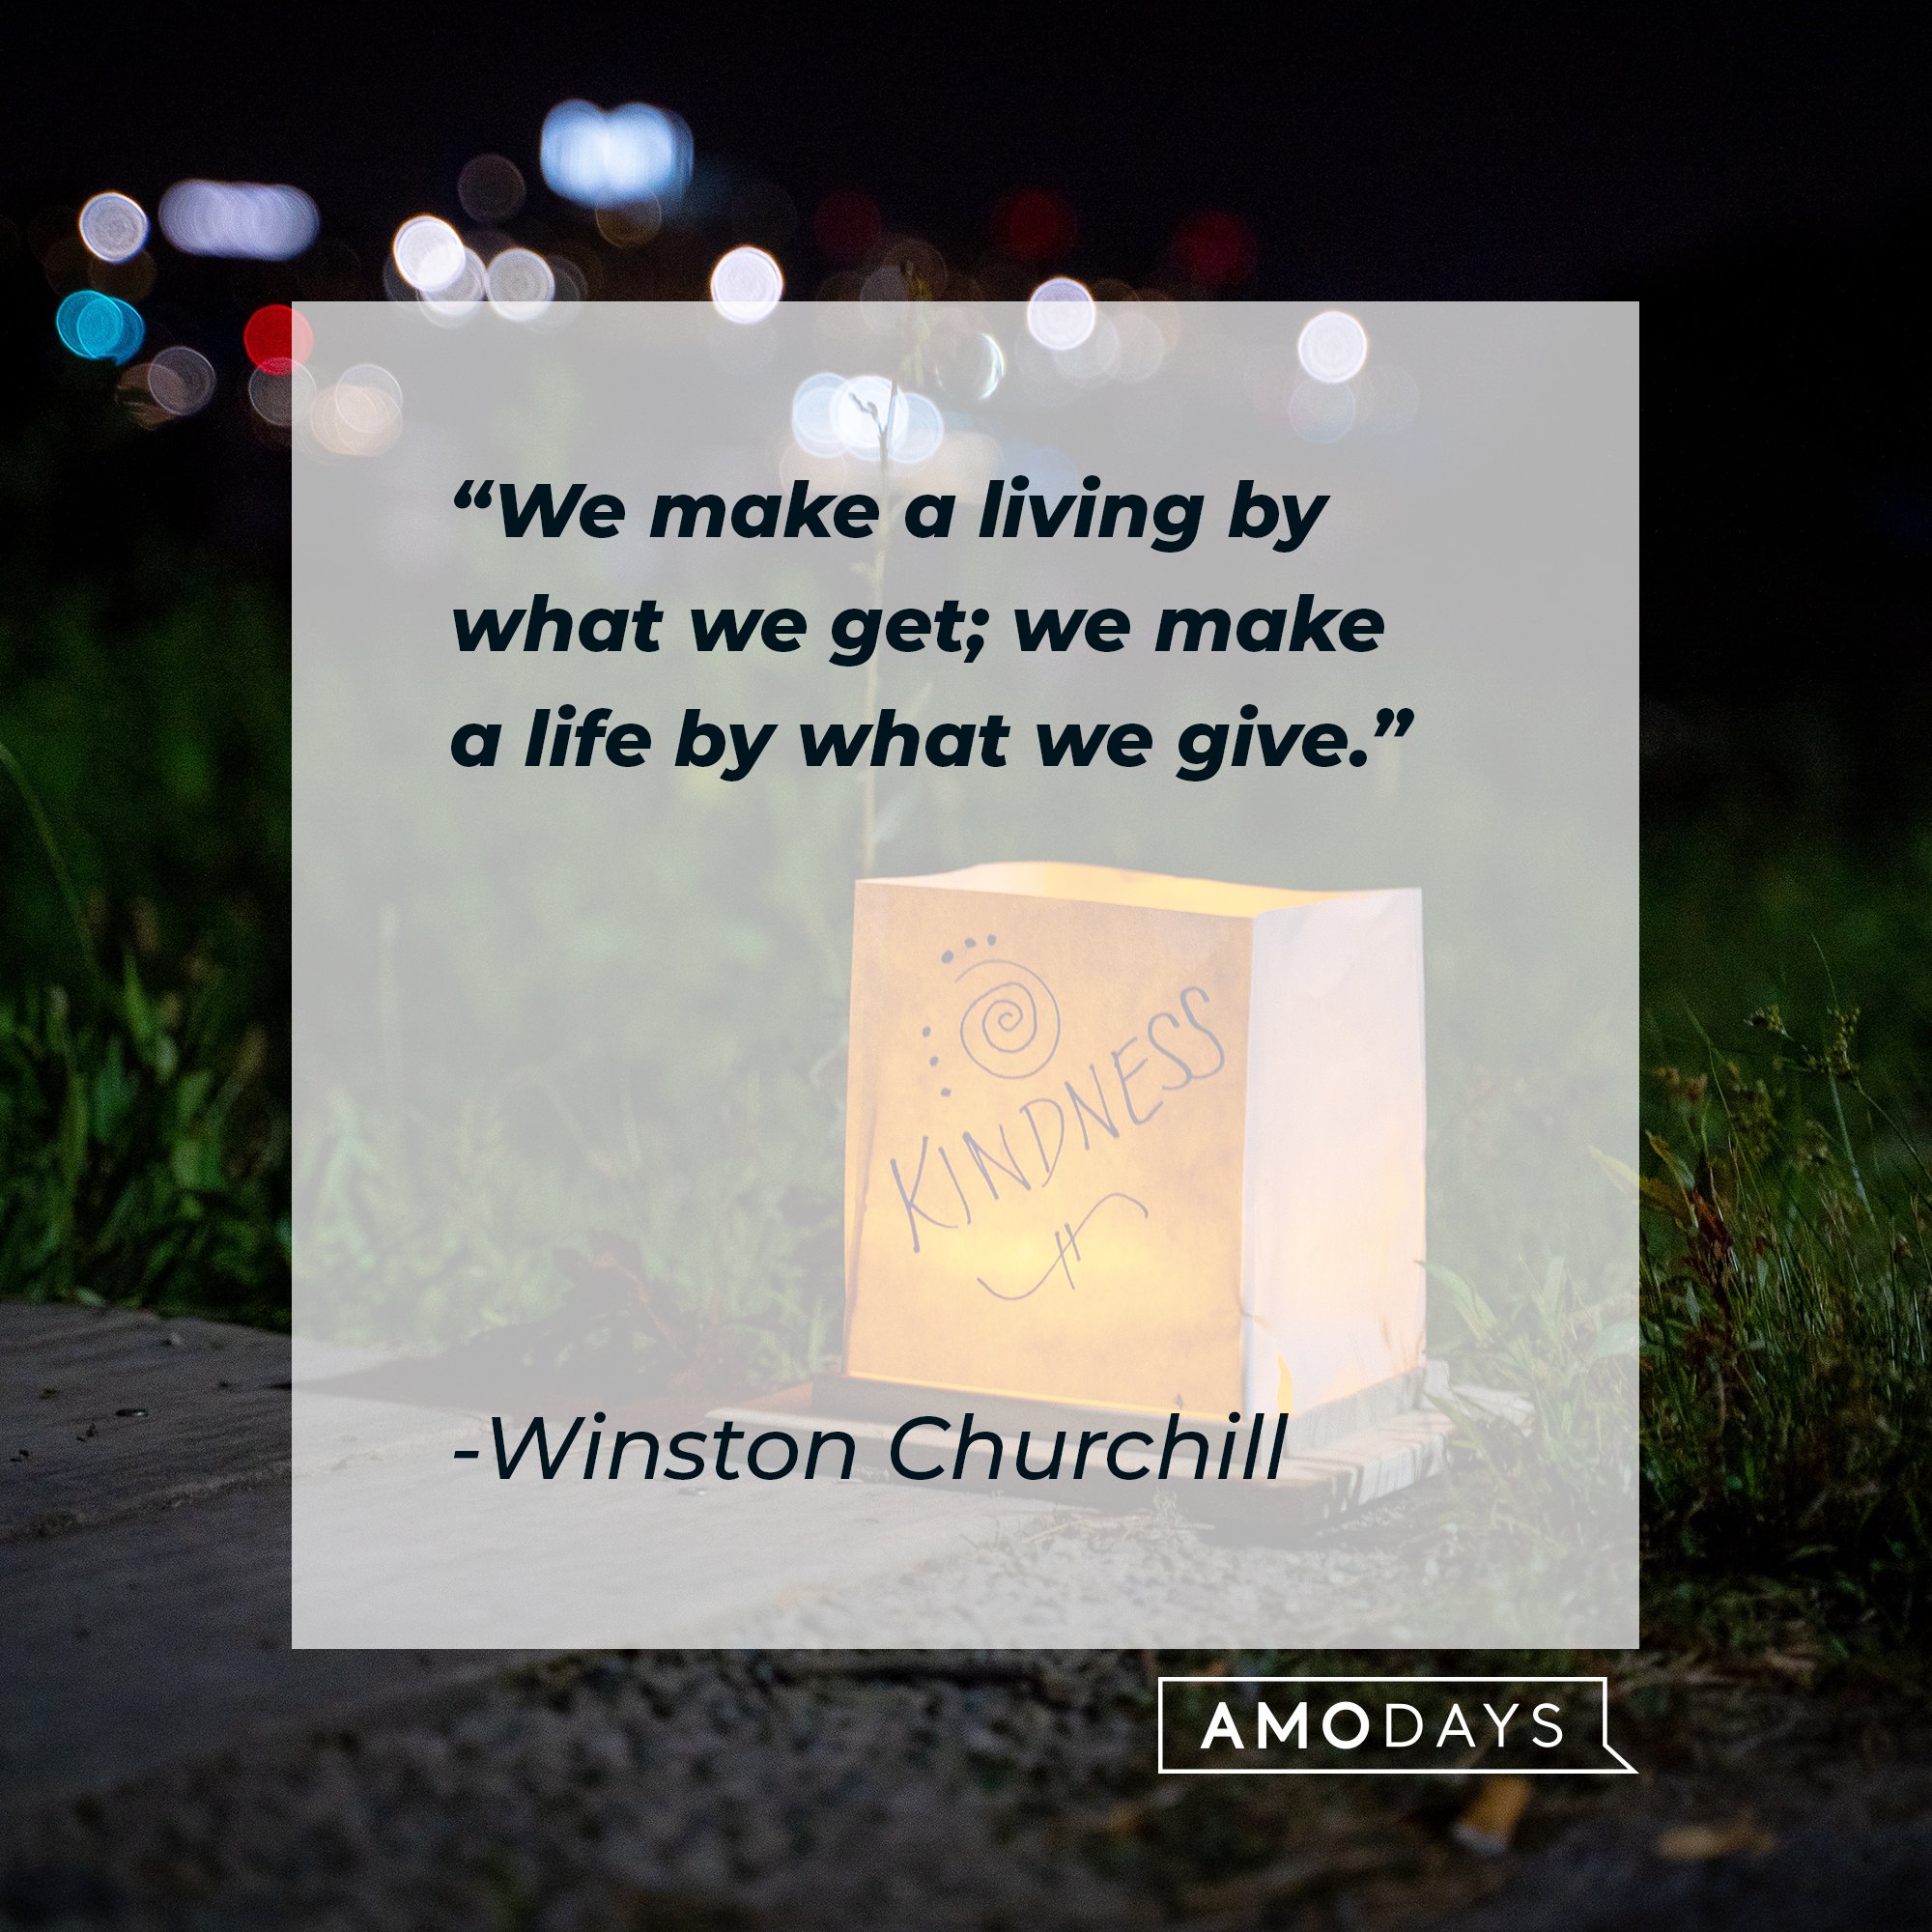 Winston Churchill’s quote: "We make a living by what we get; we make a life by what we give.” | Image: AmoDays 